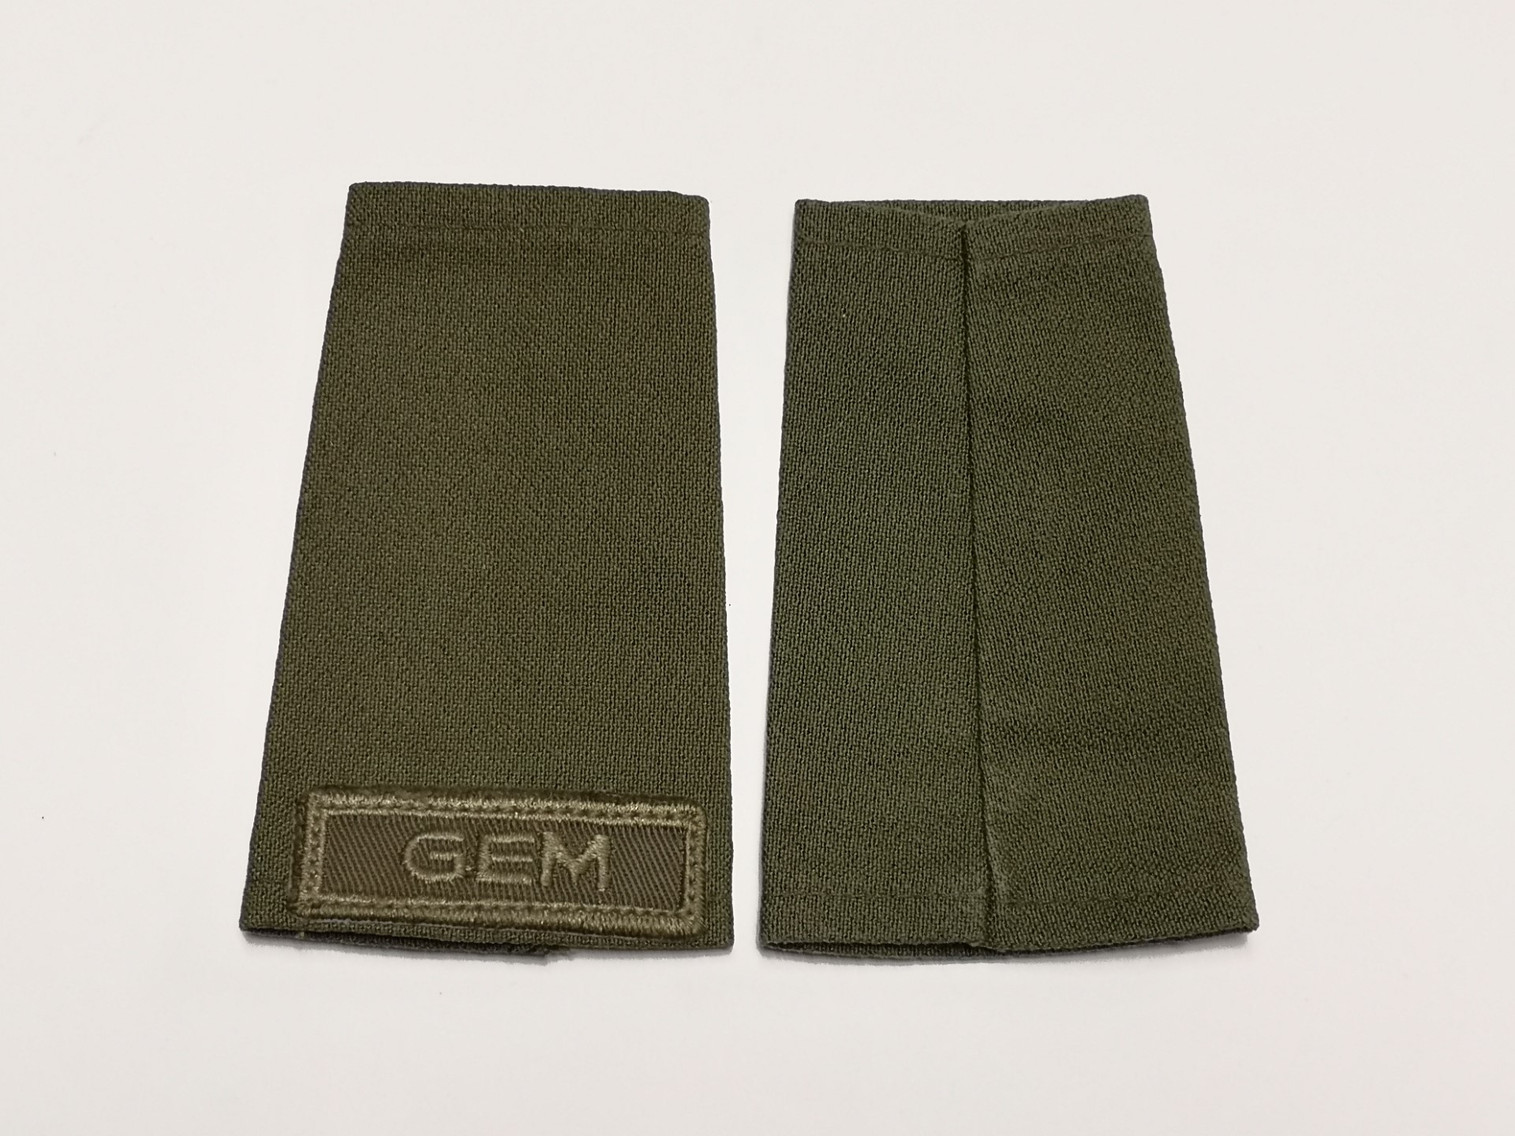 Canadian Armed Forces Green Rank Epaulets GEM - Private (Basic)